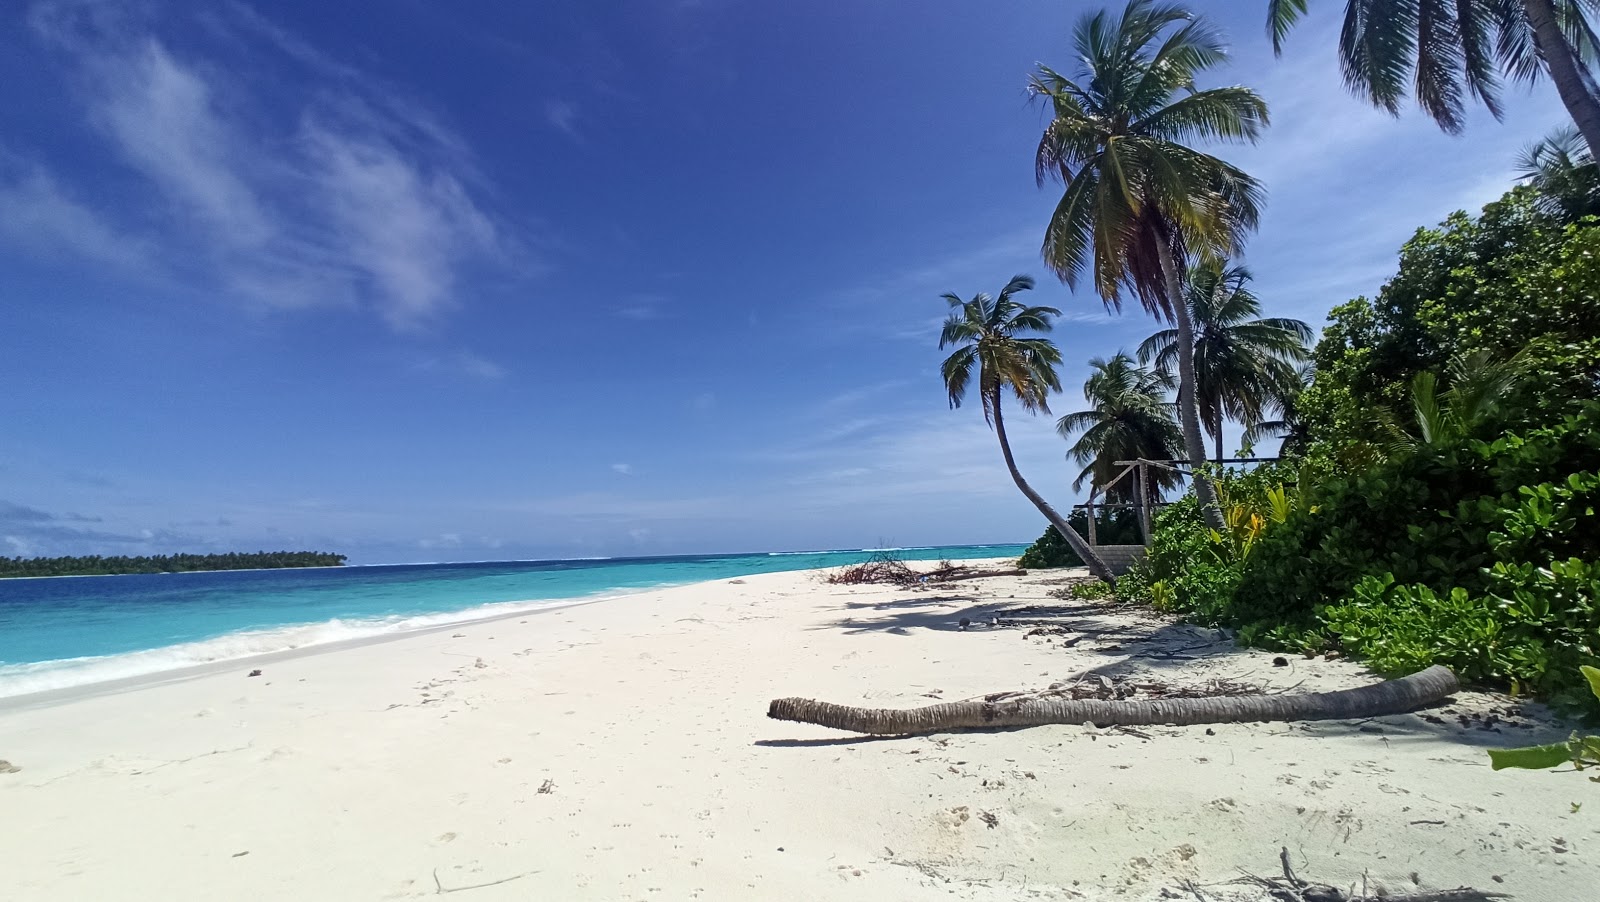 Photo of Faruhulhudhoo Beach with white sand surface